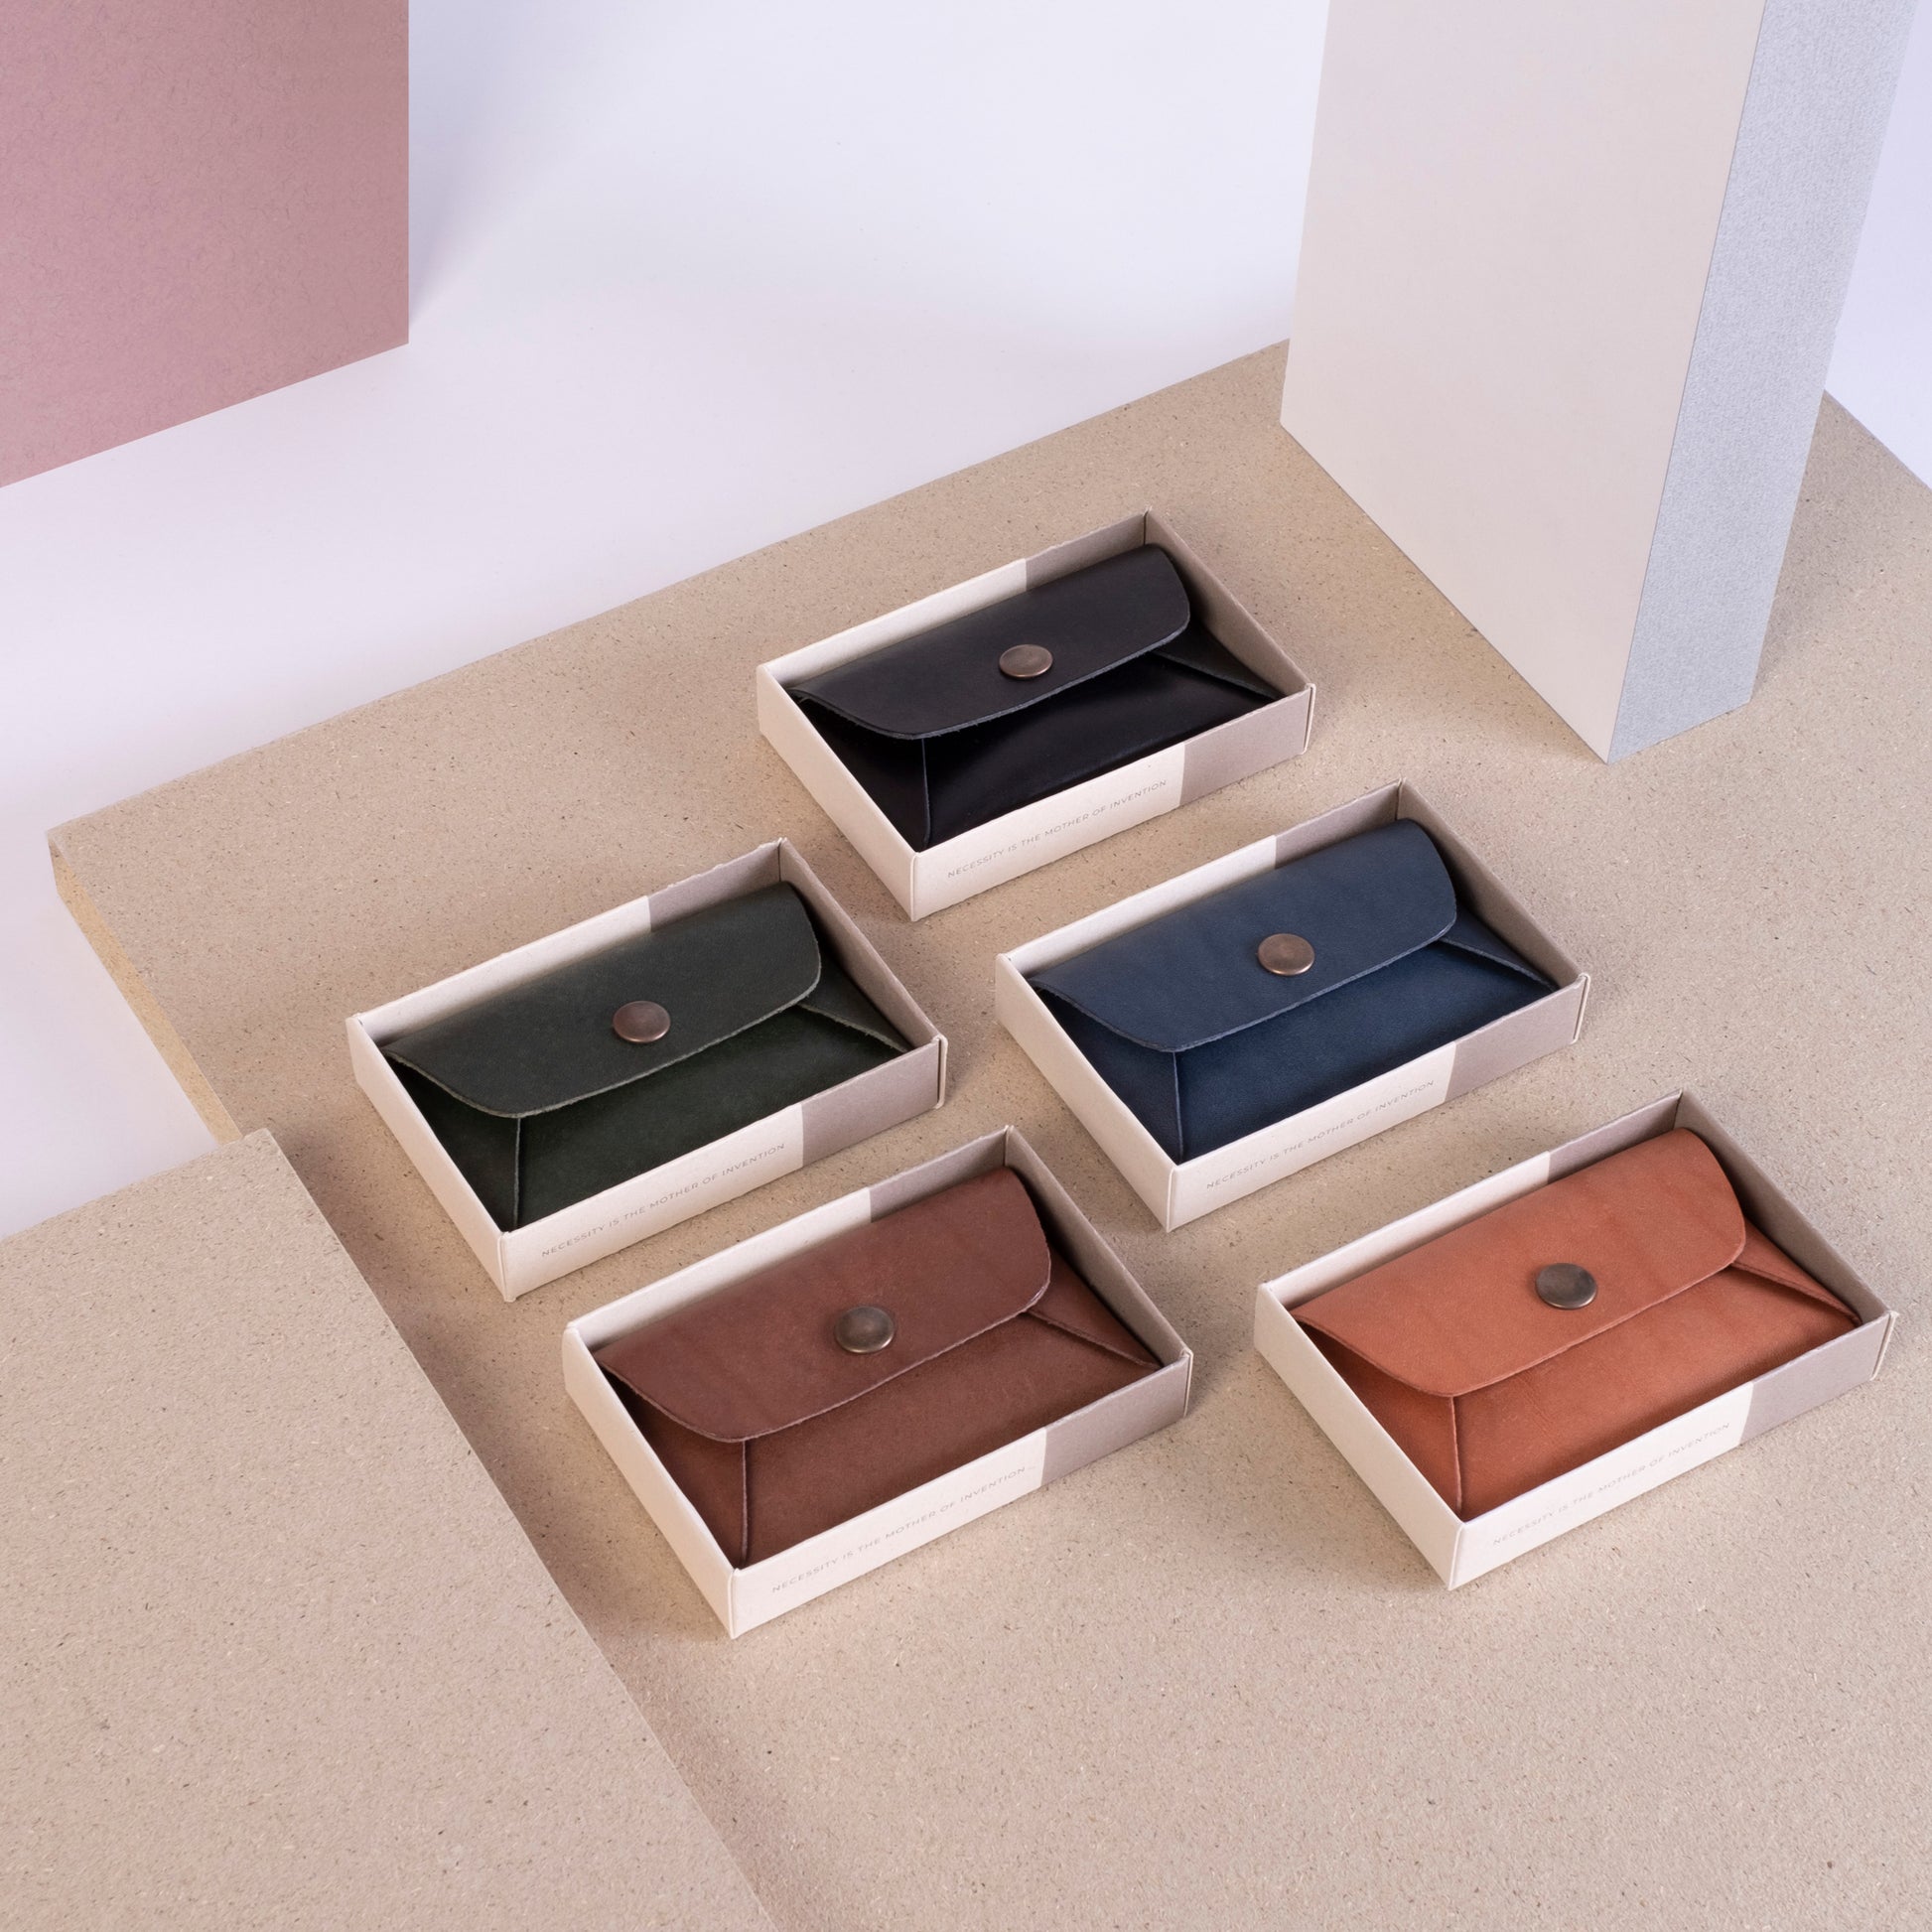 Nitmoi Minimalist Wallet - small leather cardholder in 5 natural colours